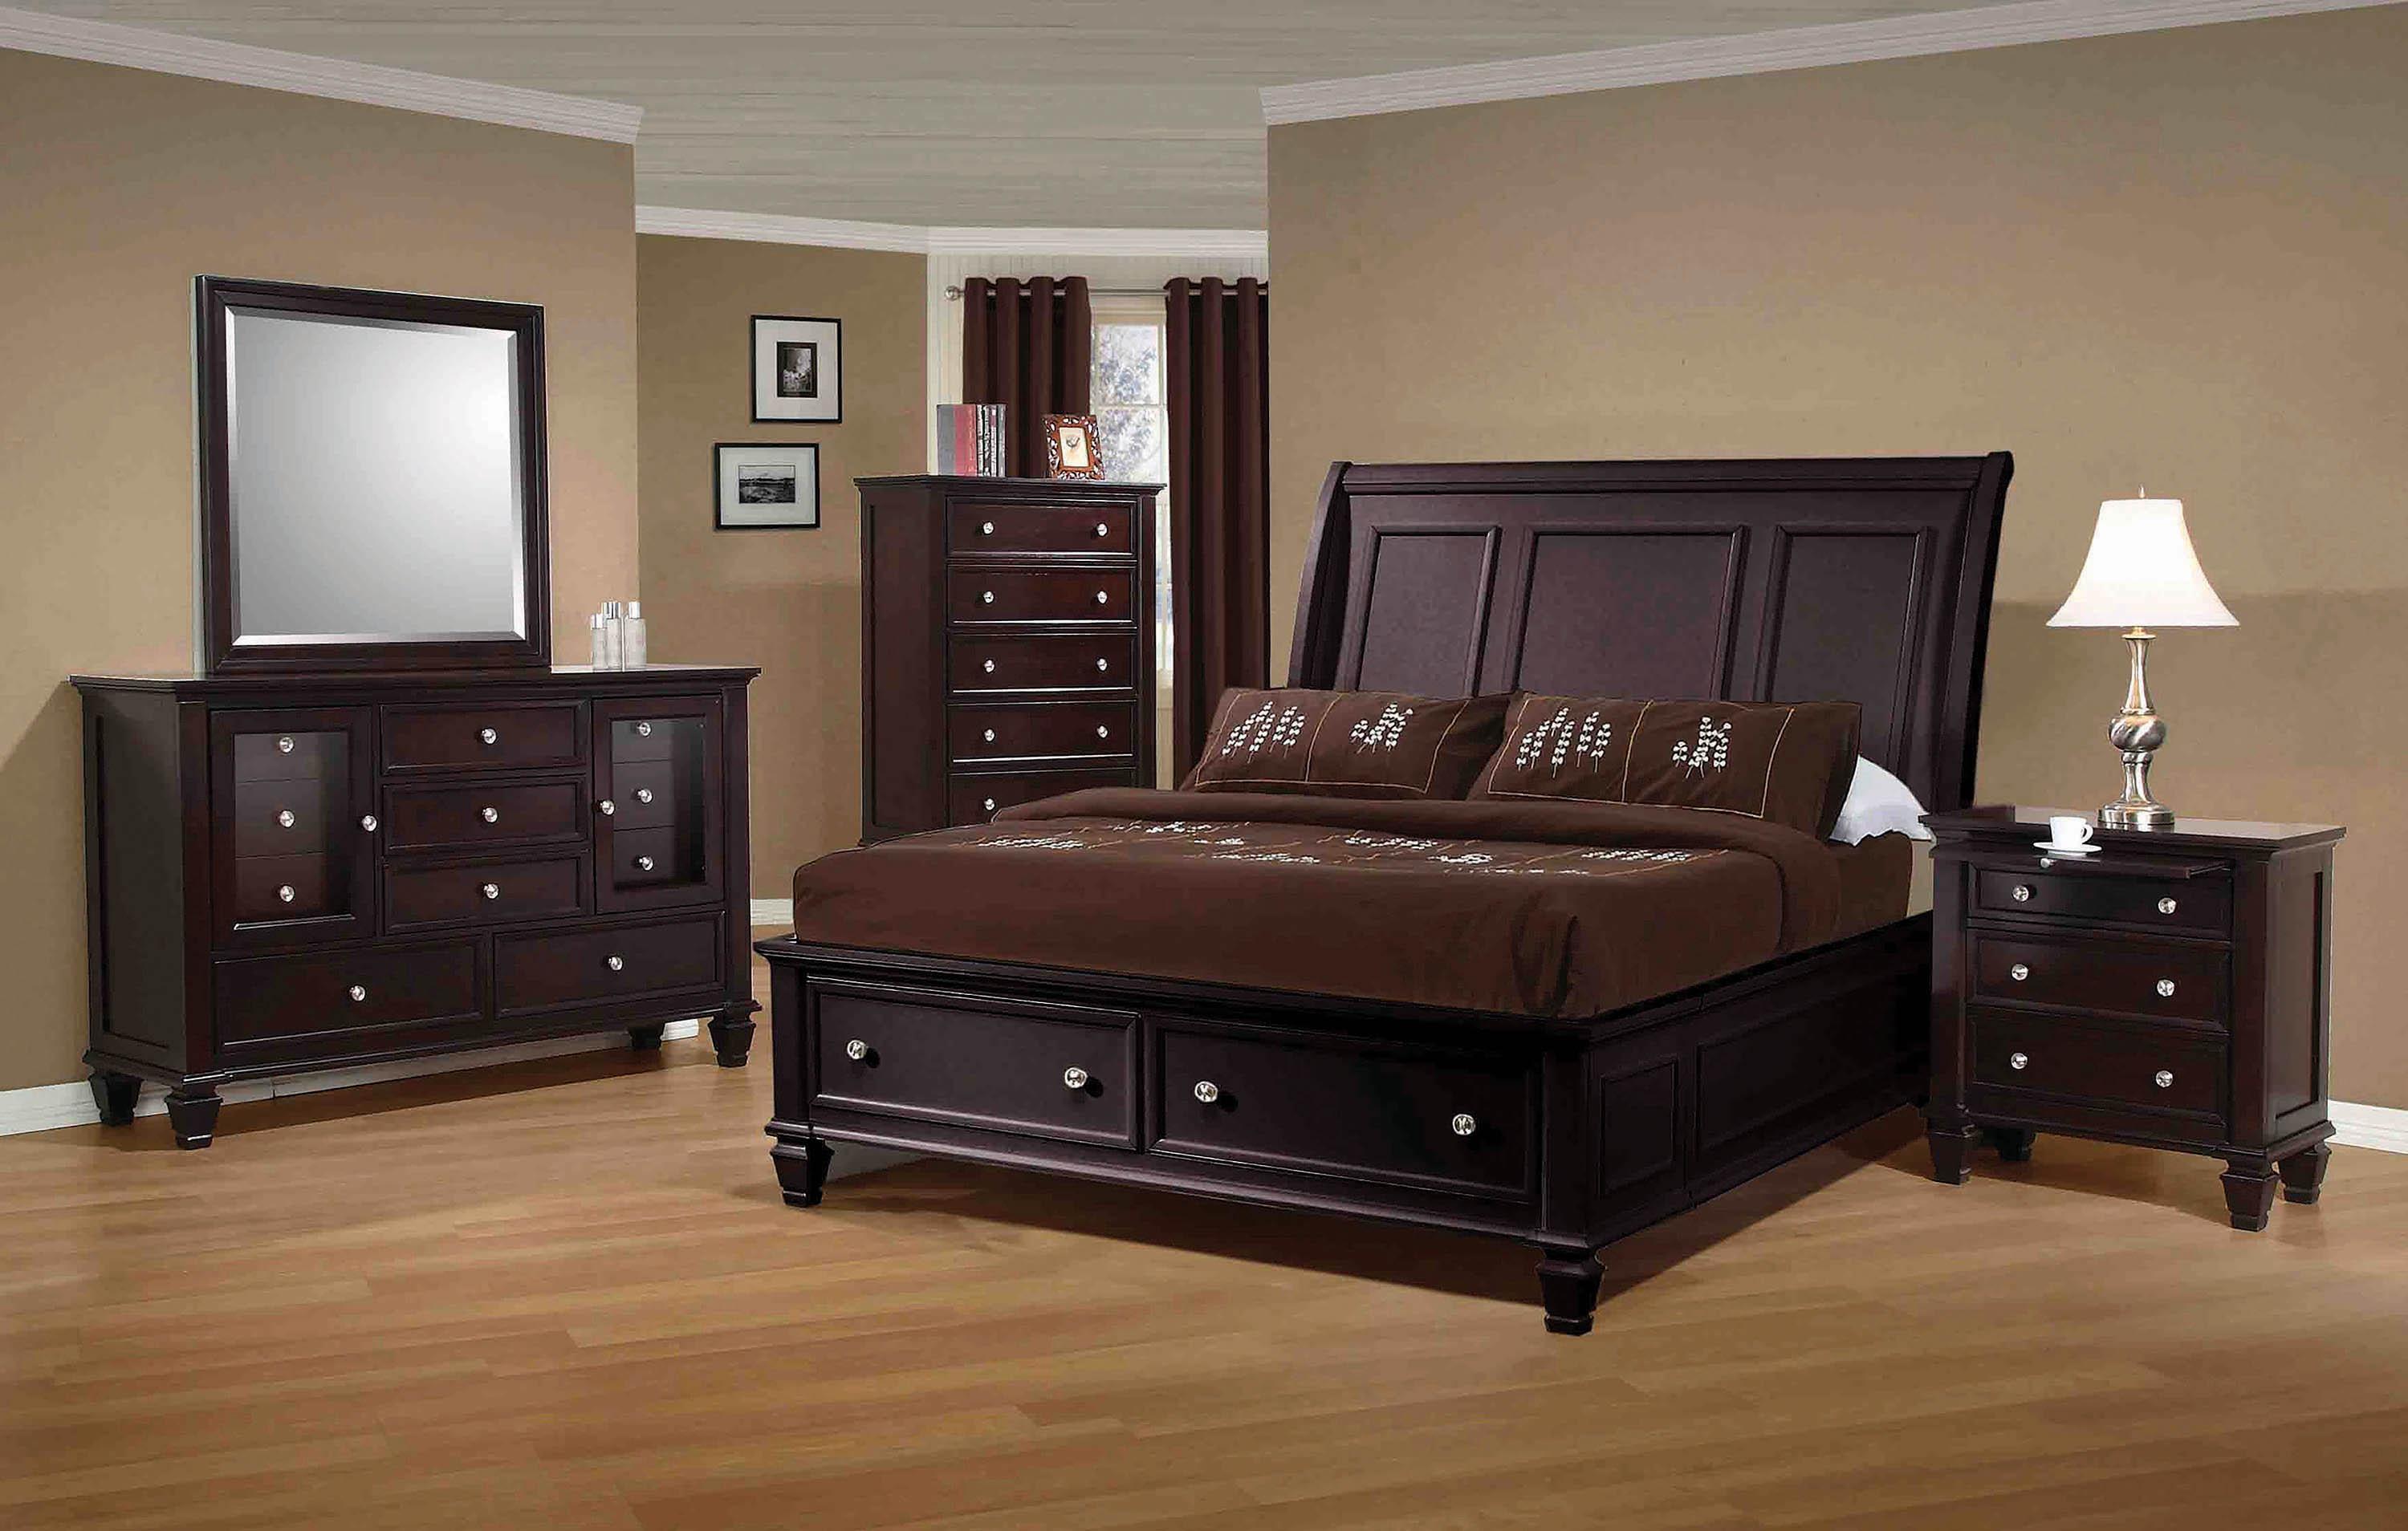 

    
Transitional Brown Wood C king bed by Coaster
